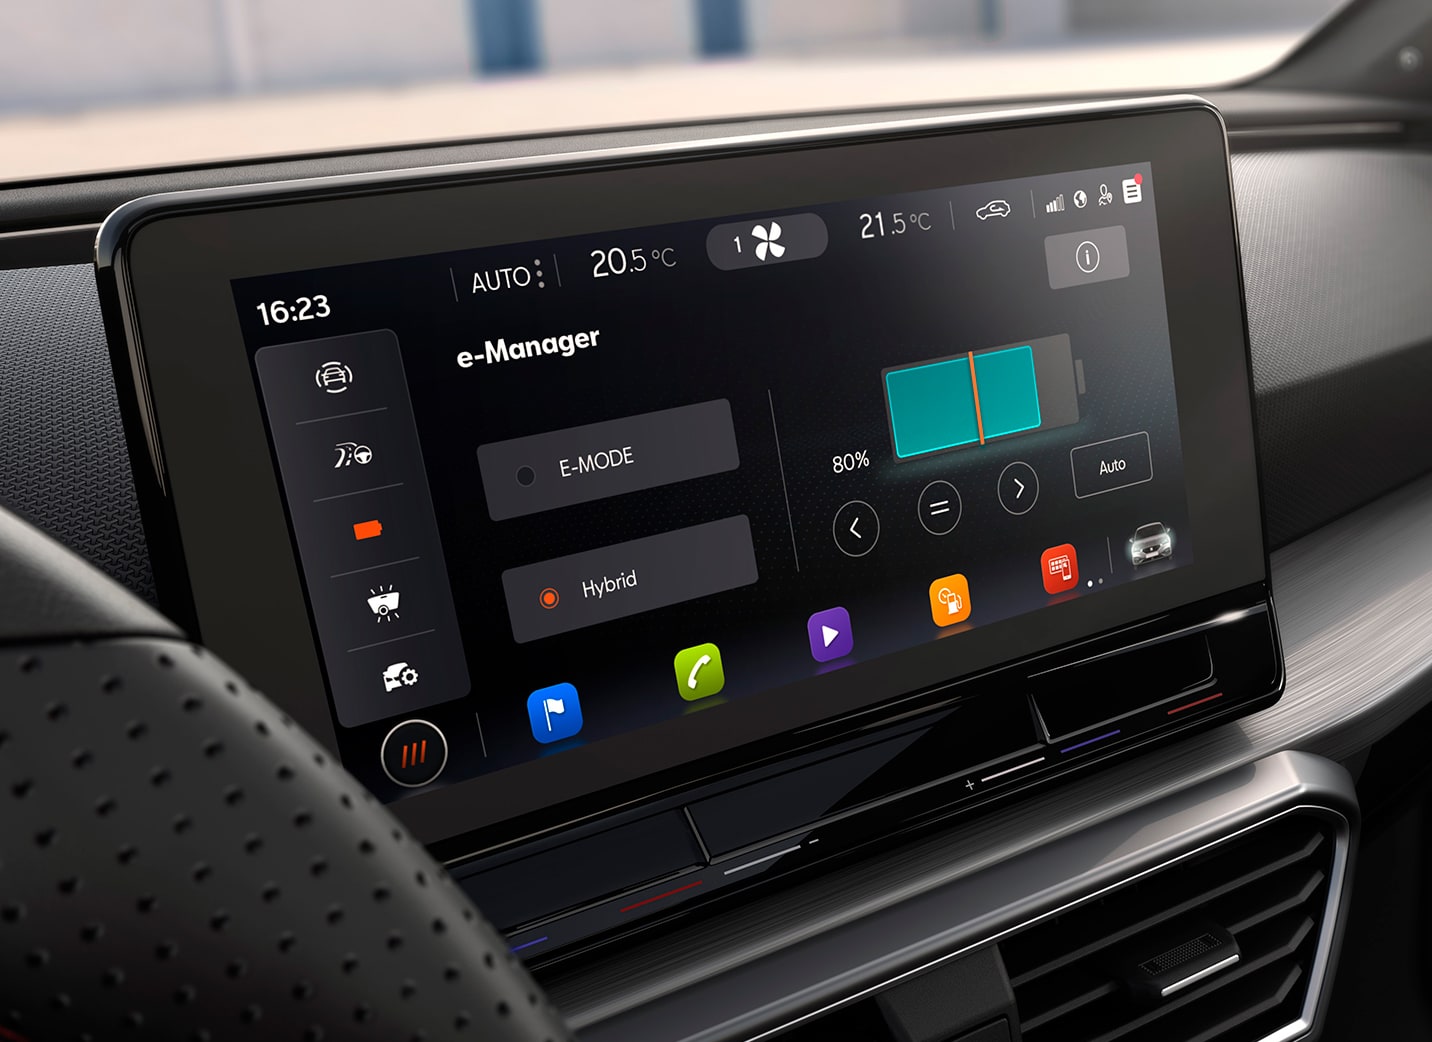 SEAT Leon sportstourer 2020 ehybrid 10 inch navi system with phev screen detailed view